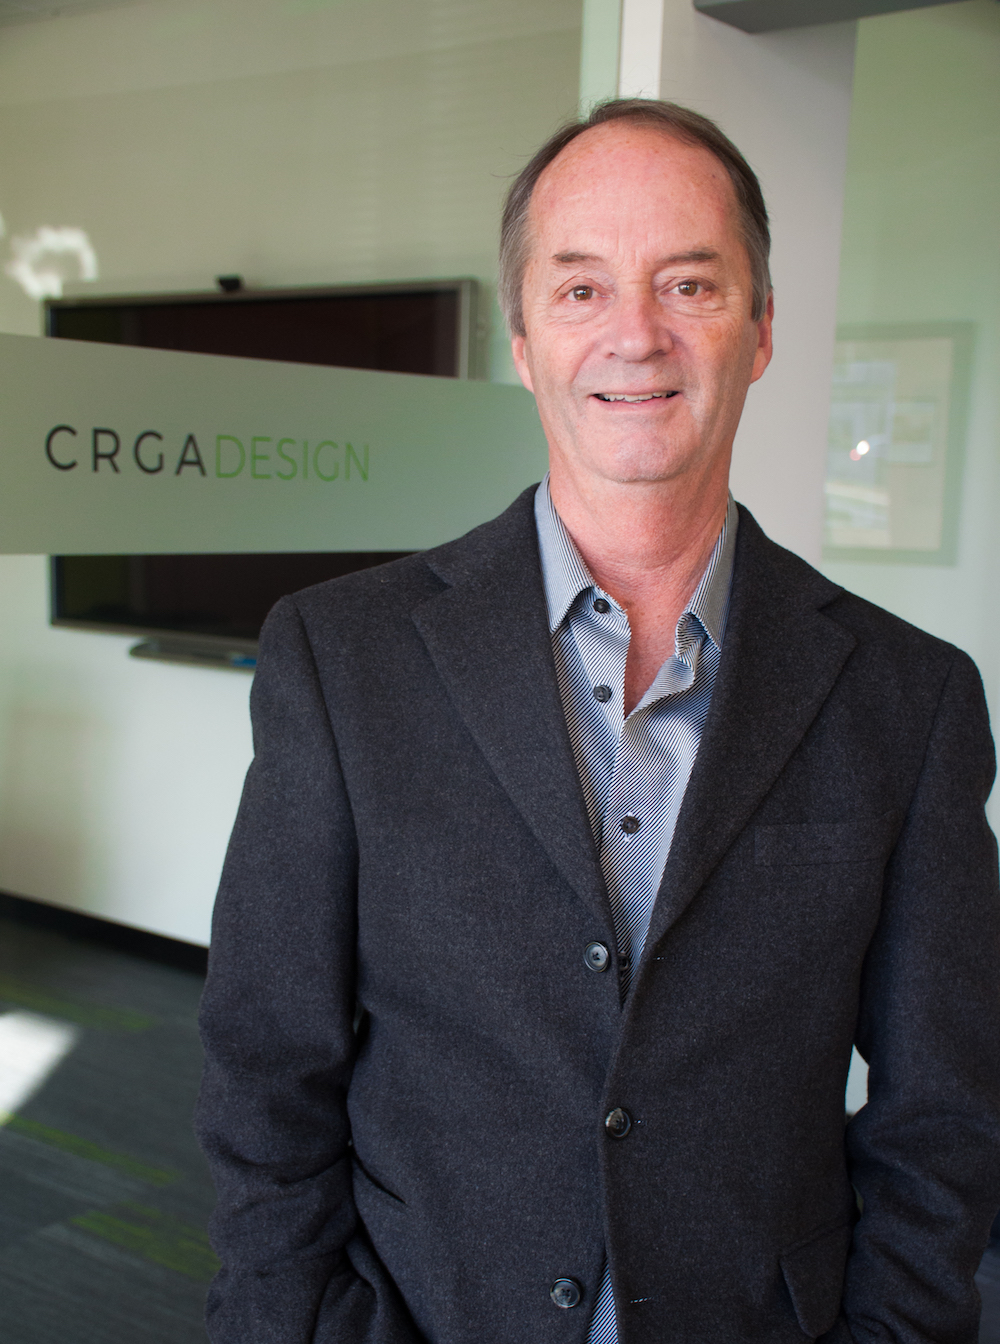 Lee Driskill brings over 25 years of architectural design experience to CRGA, specializing in senior living communities.